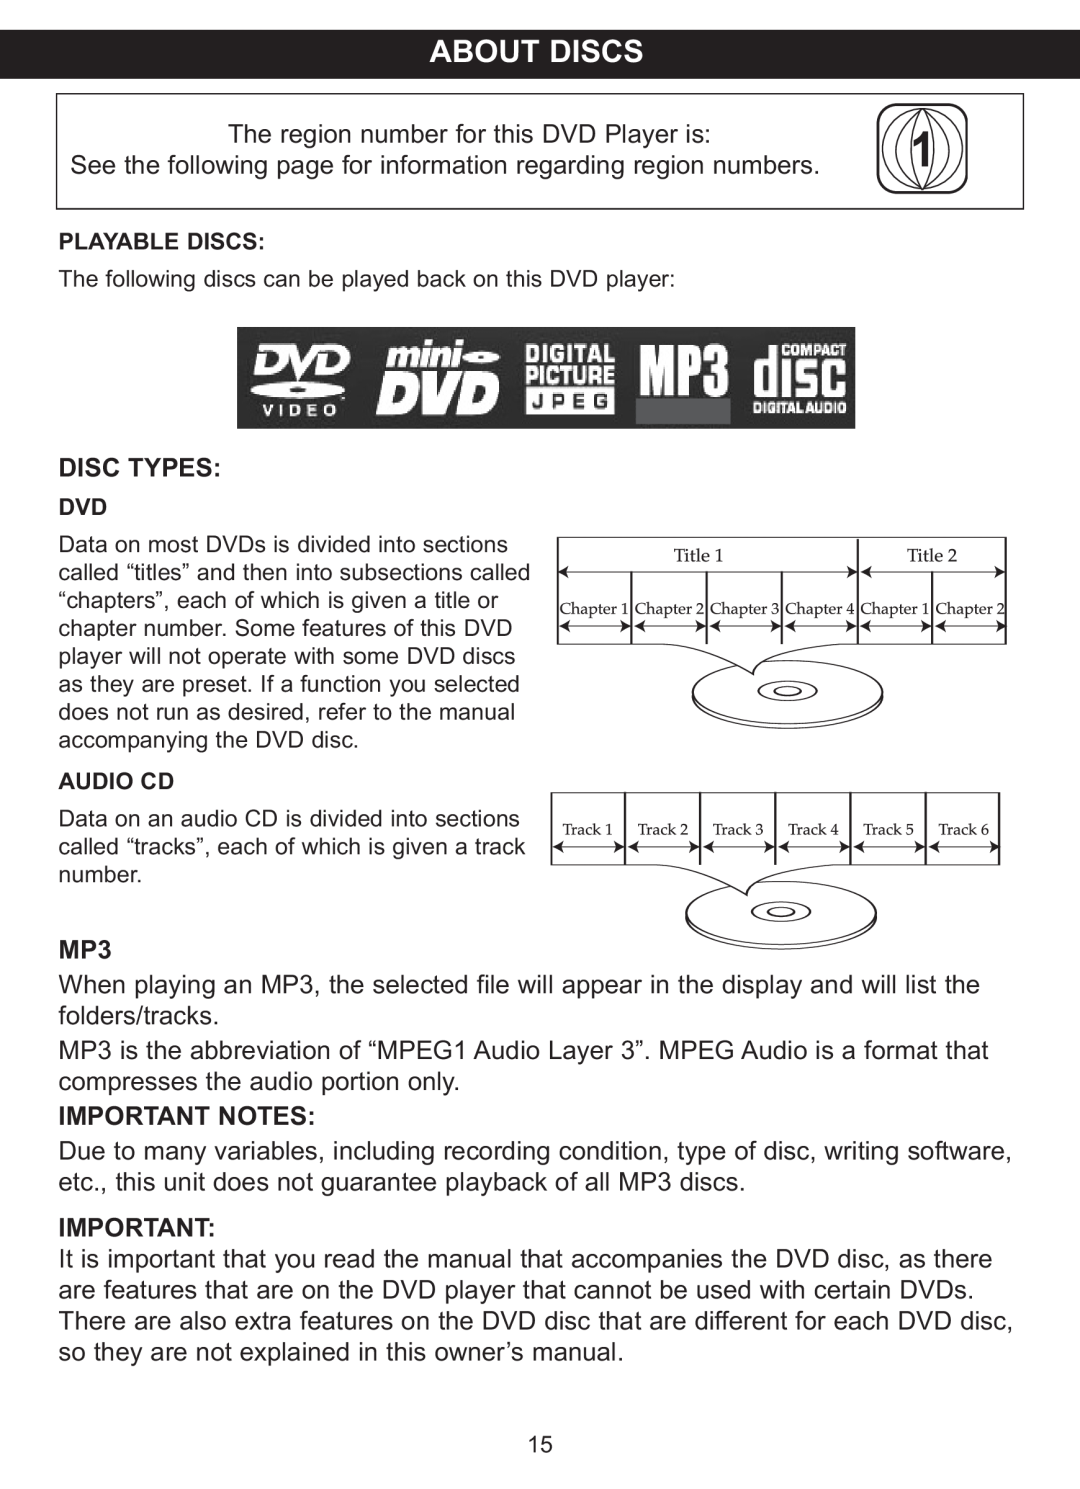 Memorex MVDP1088 manual About Discs, Disc Types, Important Notes 